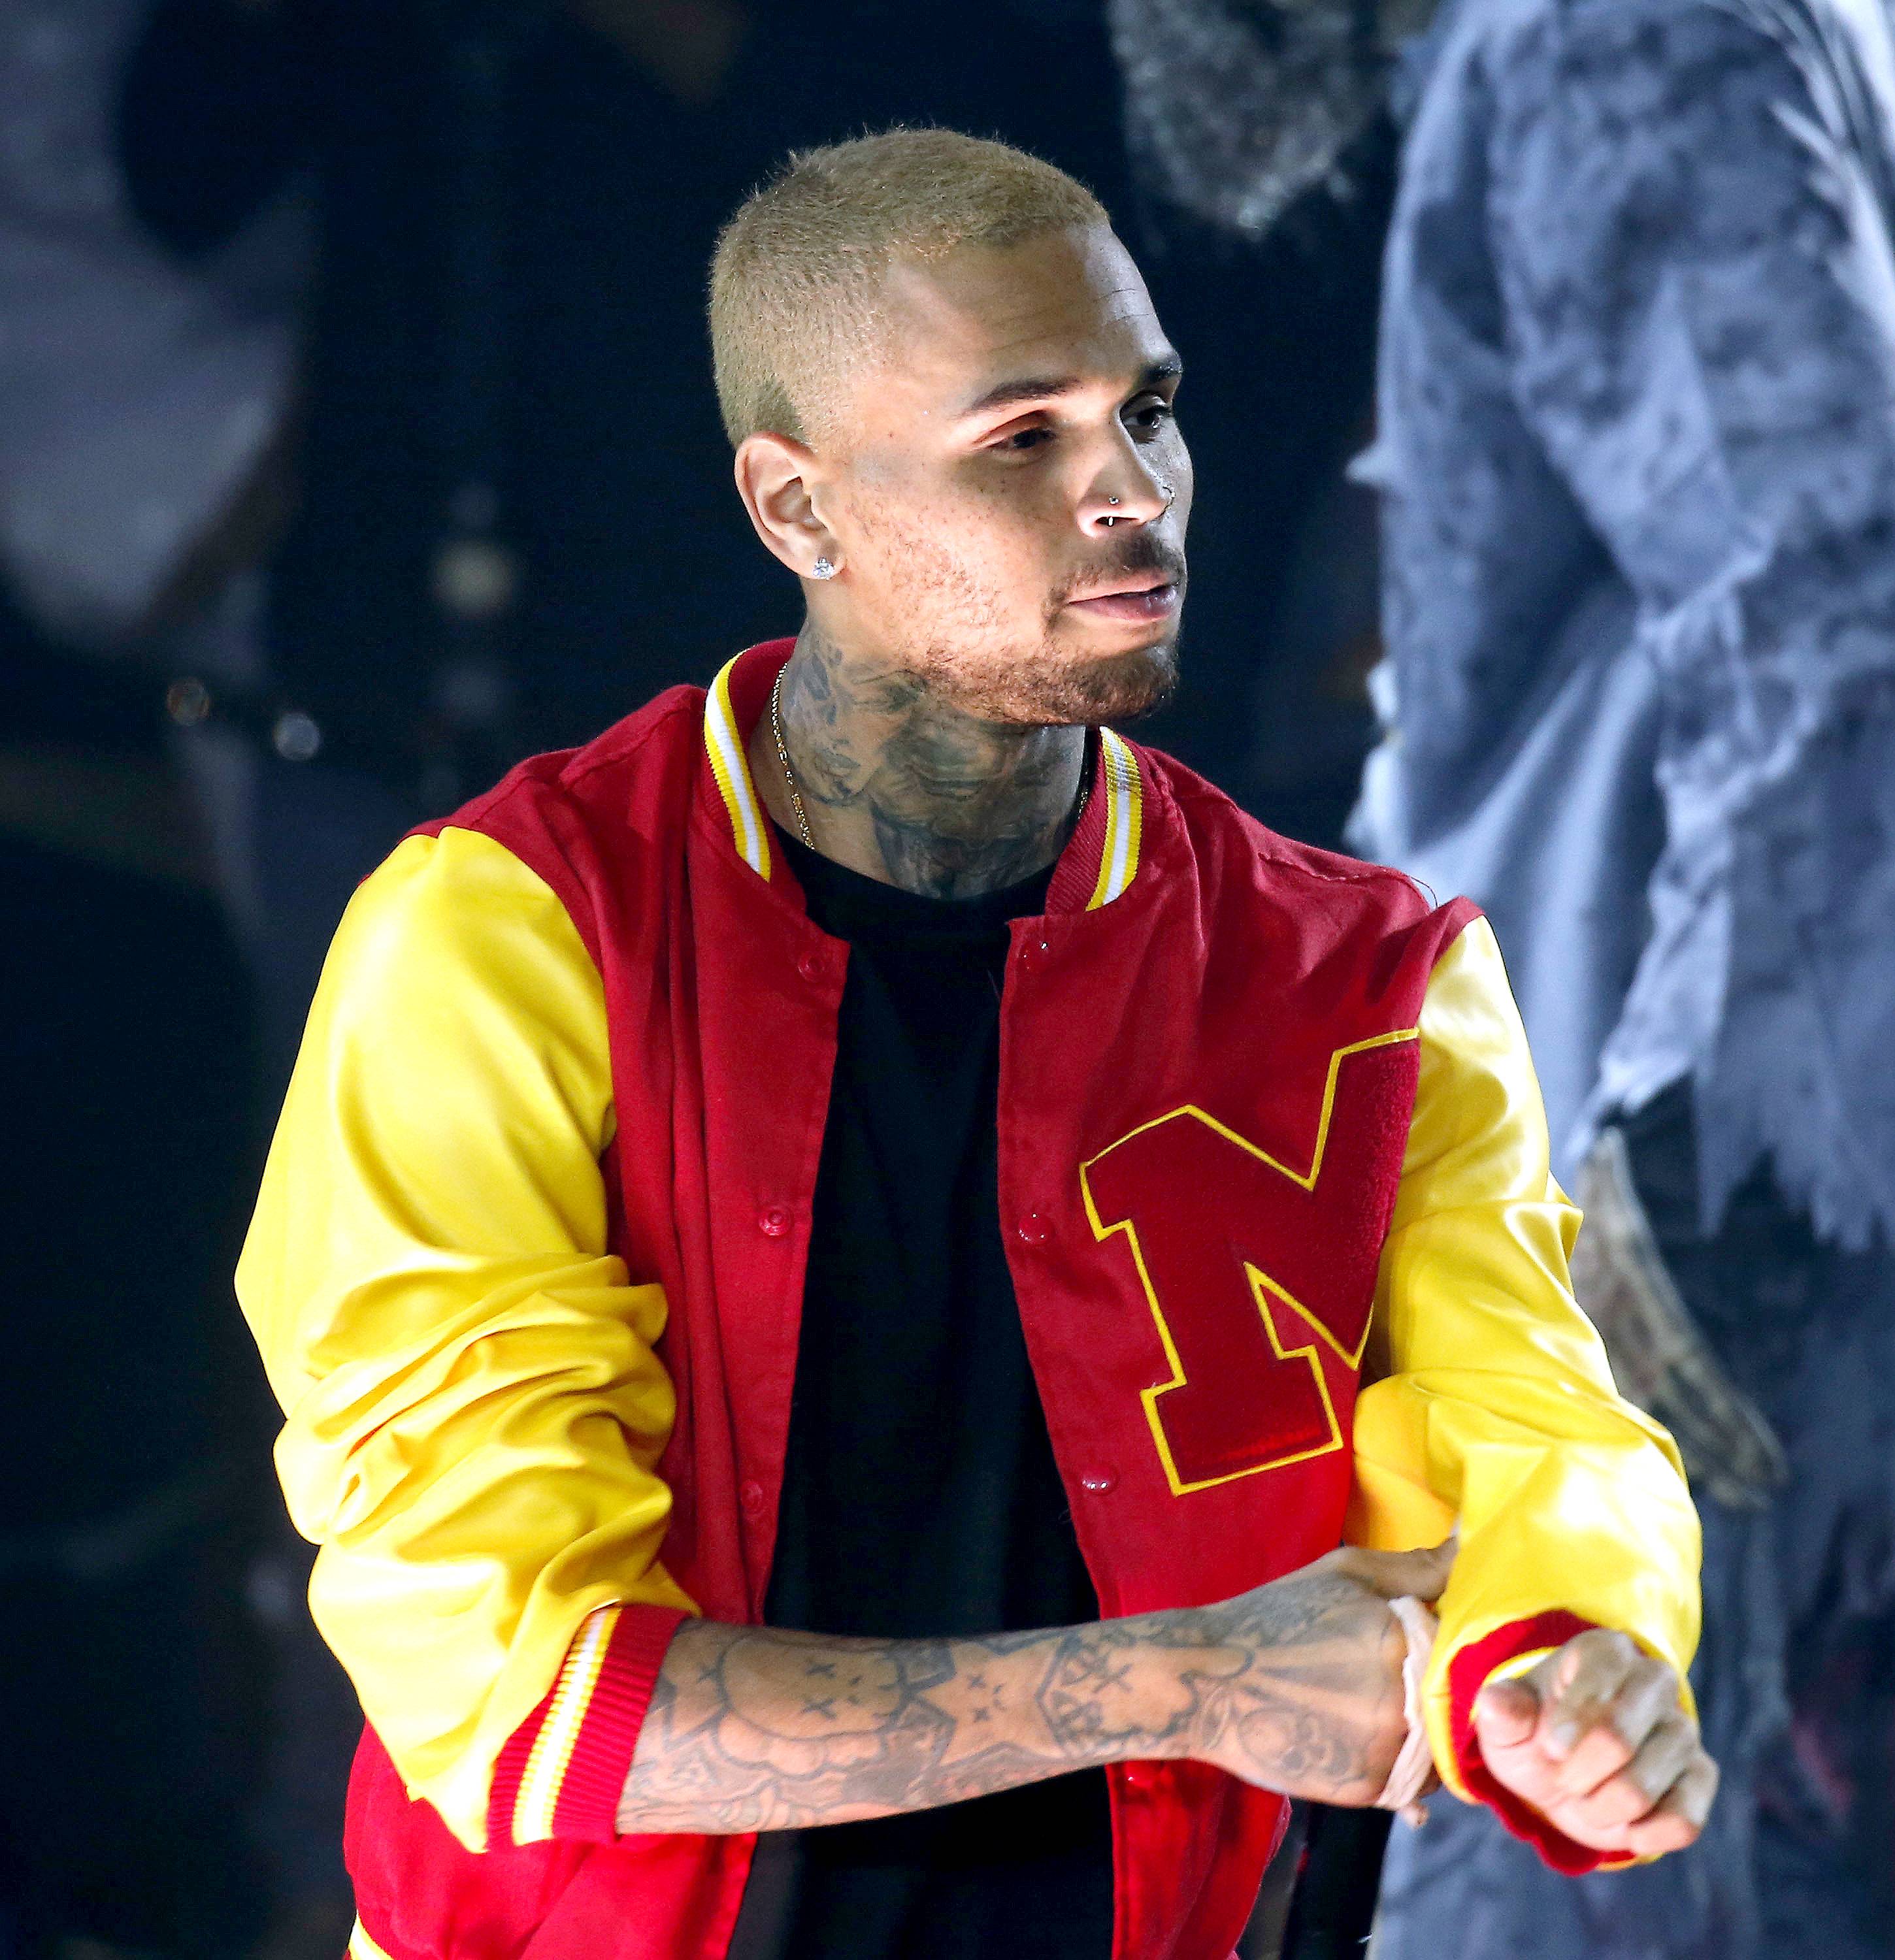 On the PettyGram - Chris Brown, as of late, is equally known for his music projects as he is for his irreverent social media behavior. Over the years, Chris has seemingly taken control of his anger and transformed it into grade-A level pettiness that cannot be rivaled. Here are some of his pettiest moments. – Jon Reyes(Photo: Judy Eddy/WENN.com)